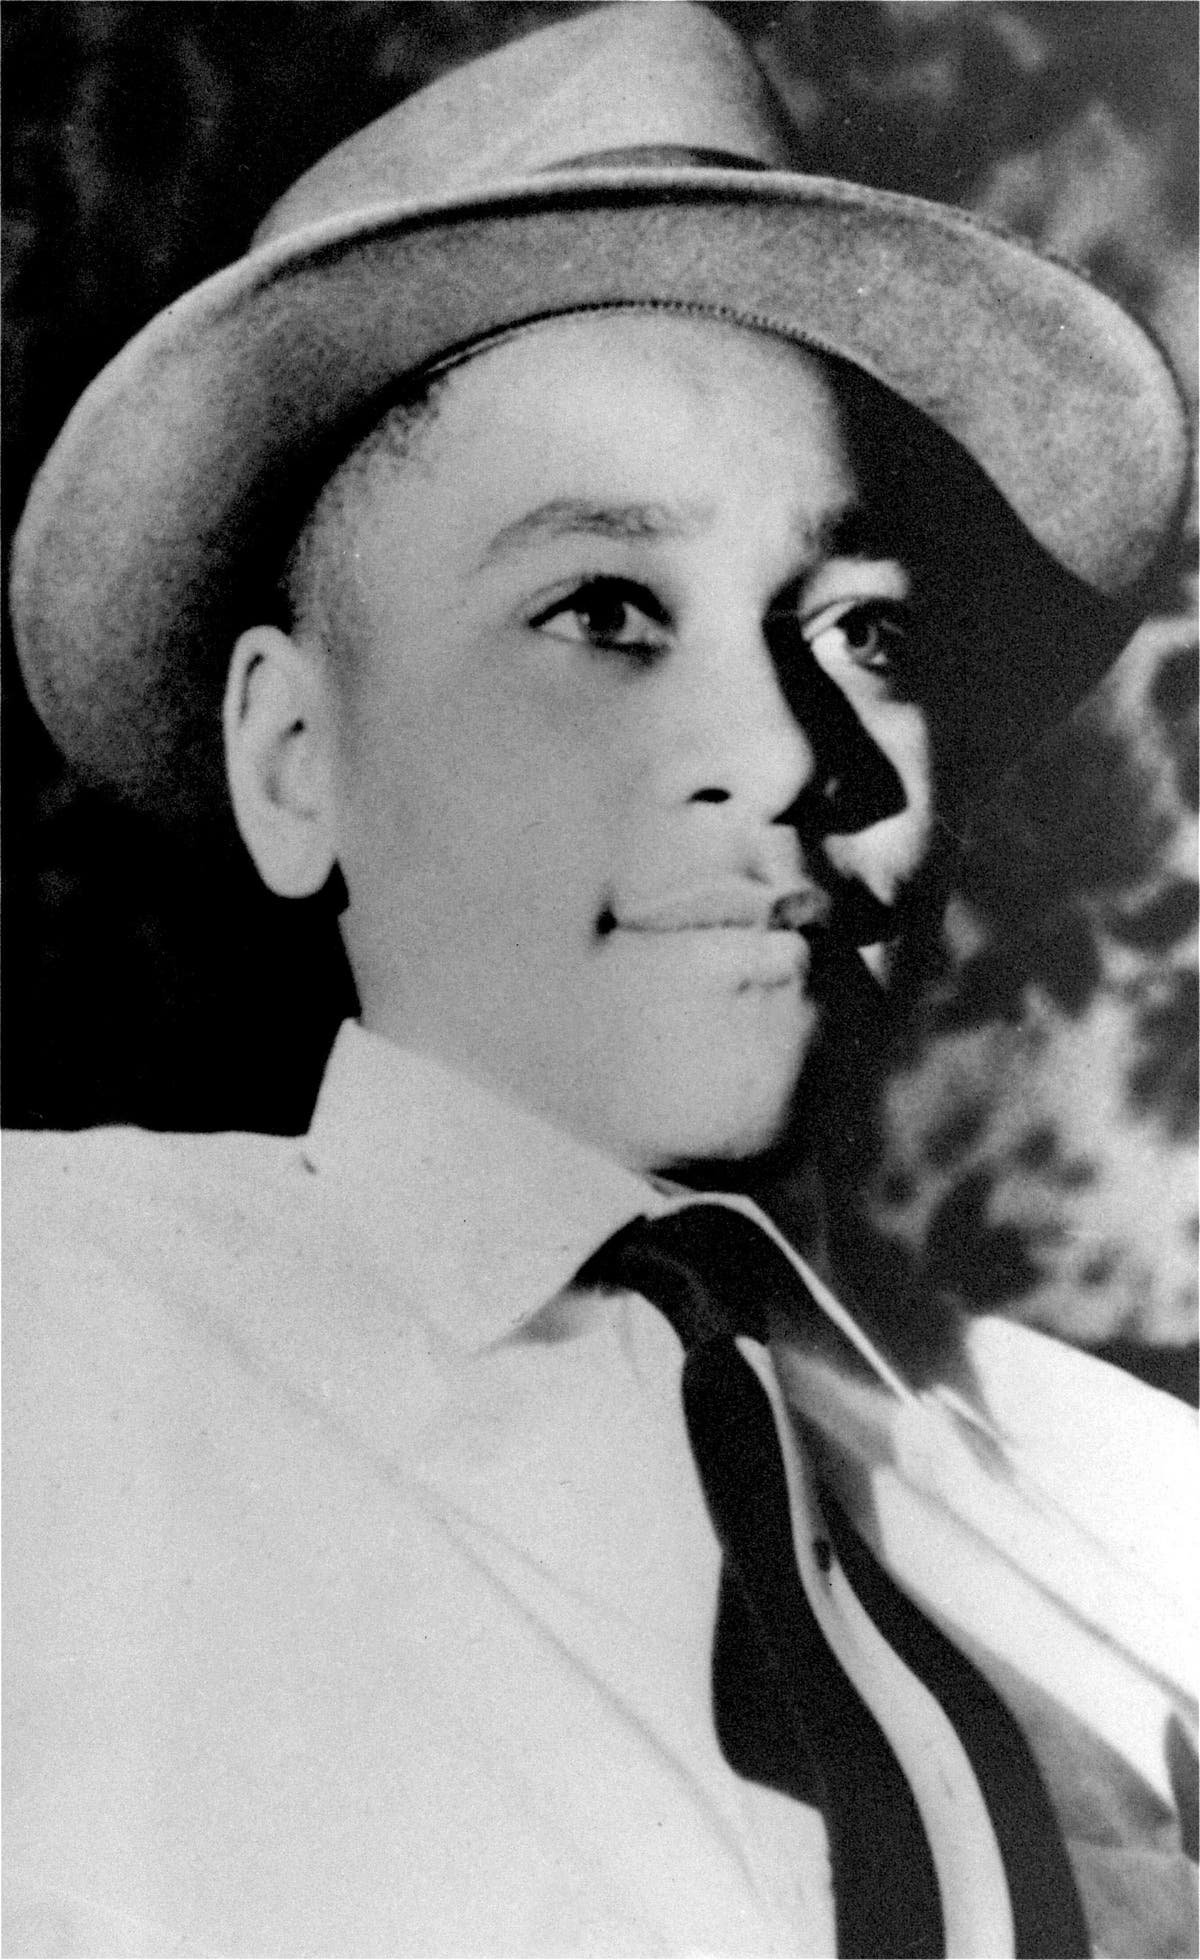 Grand jury doesn’t indict white woman whose accusations spurred Emmett Till lynching